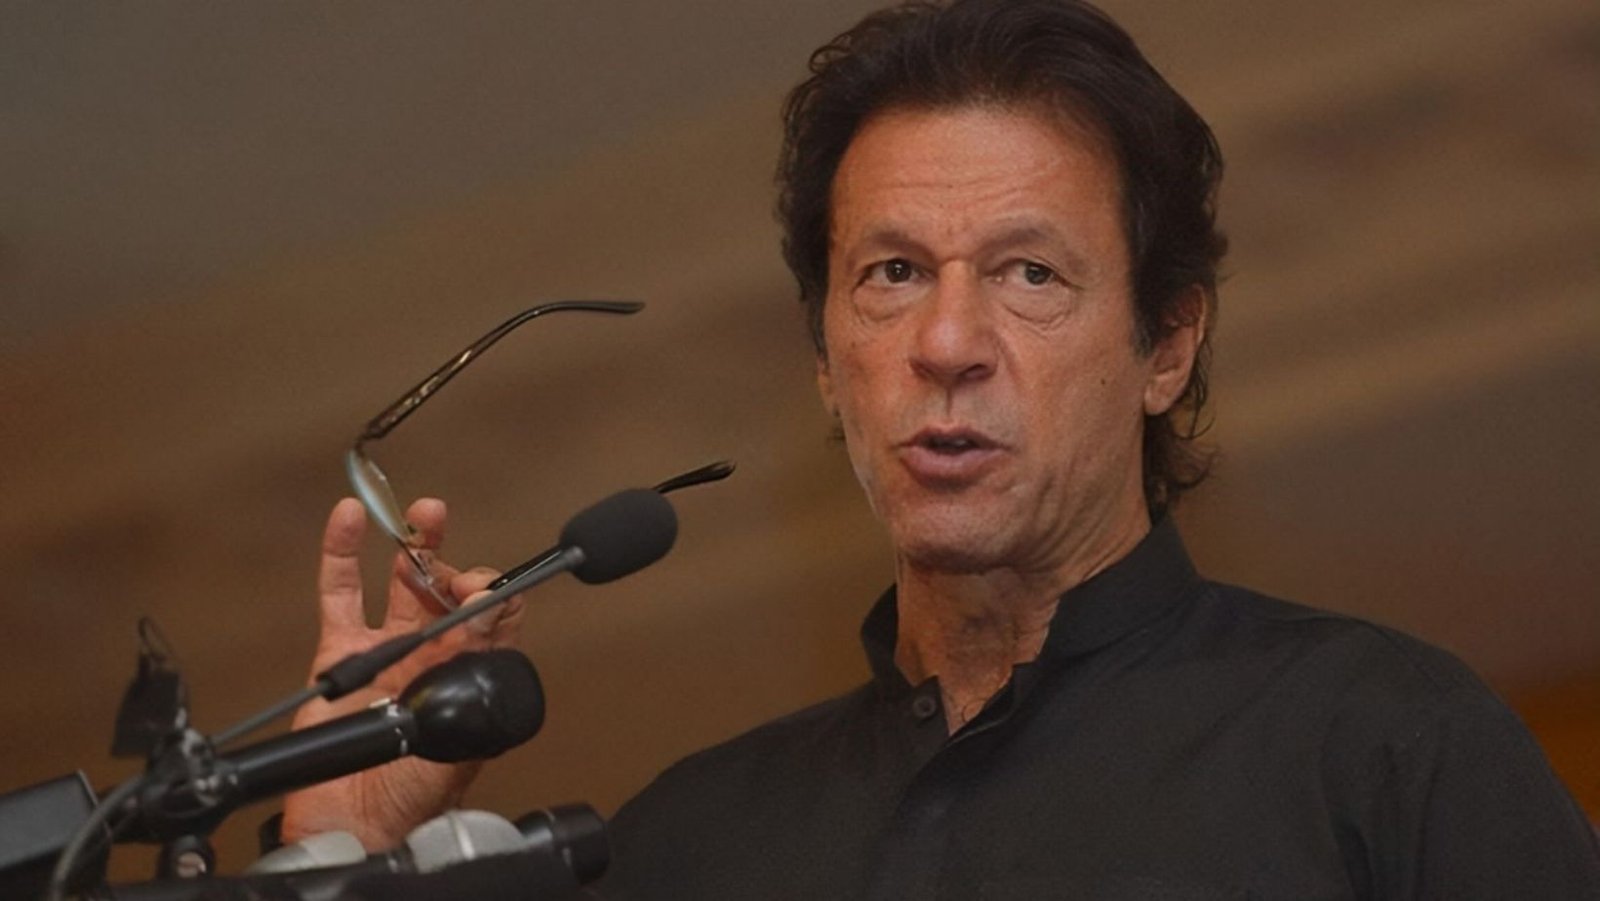 Imran presents his papers for election in each of the nine by-election districts